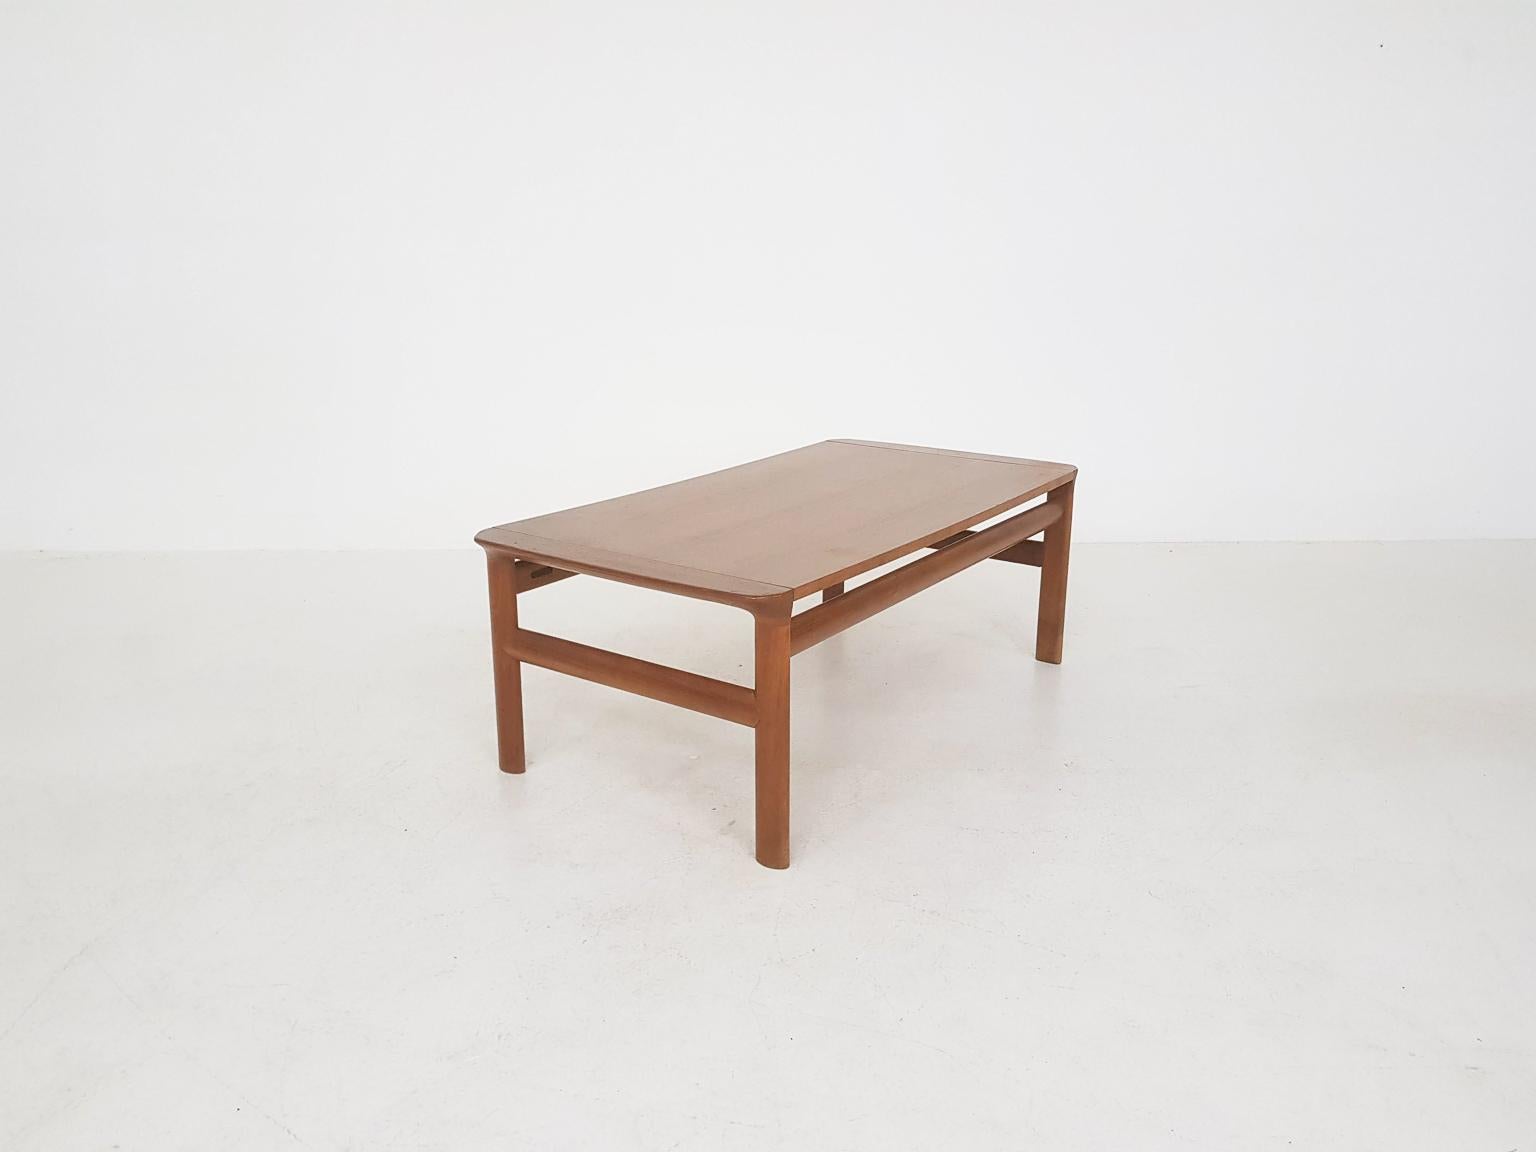 Large coffee or side table from Denmark. The table is designed by Sven Ellekaer and are part of the 